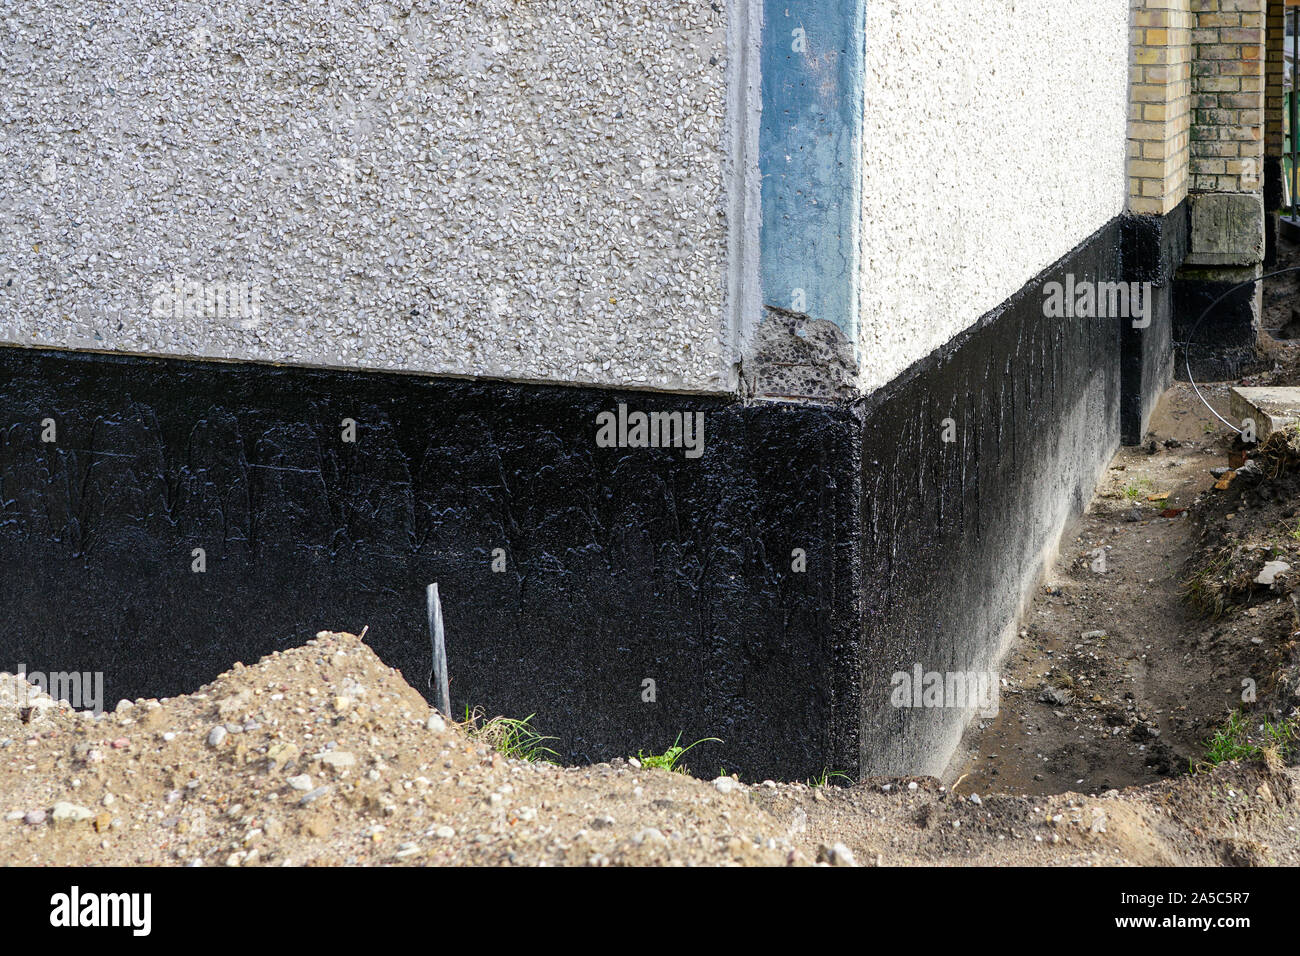 house foundation waterproofing and damp proofing with bitumen membrane Stock Photo